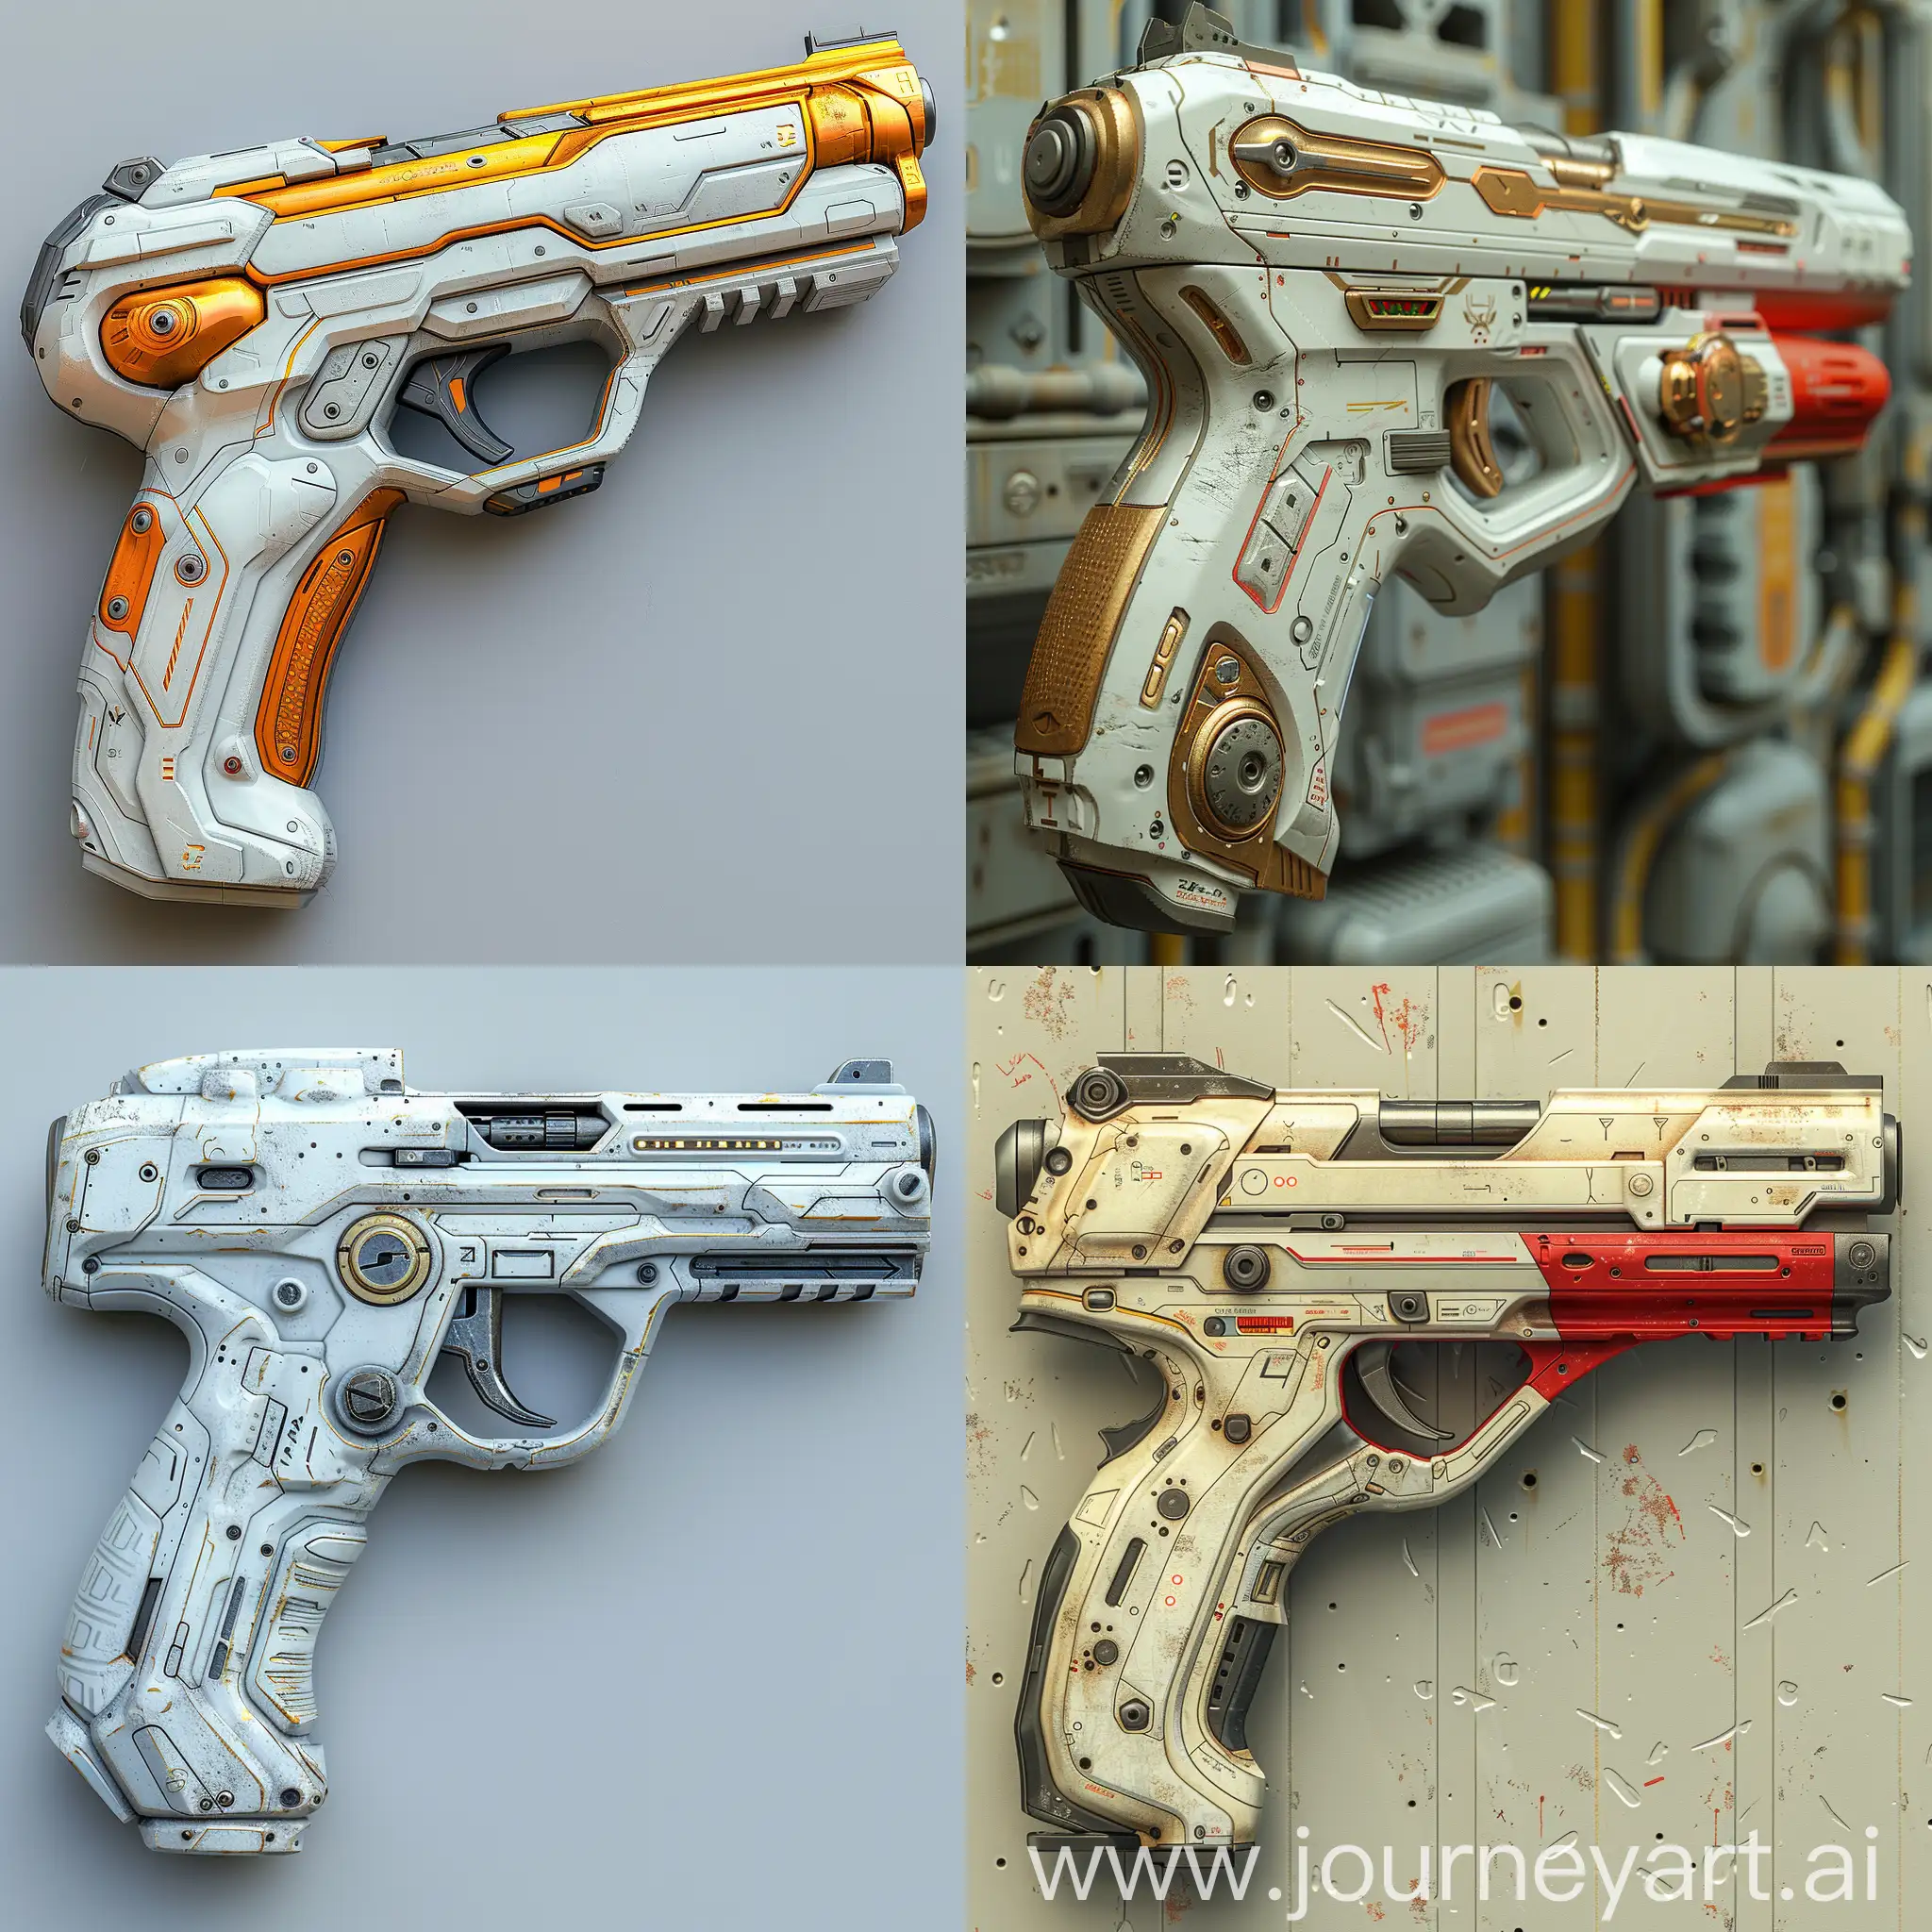 Futuristic-Energy-Pistol-with-Smart-Targeting-and-Modular-Design